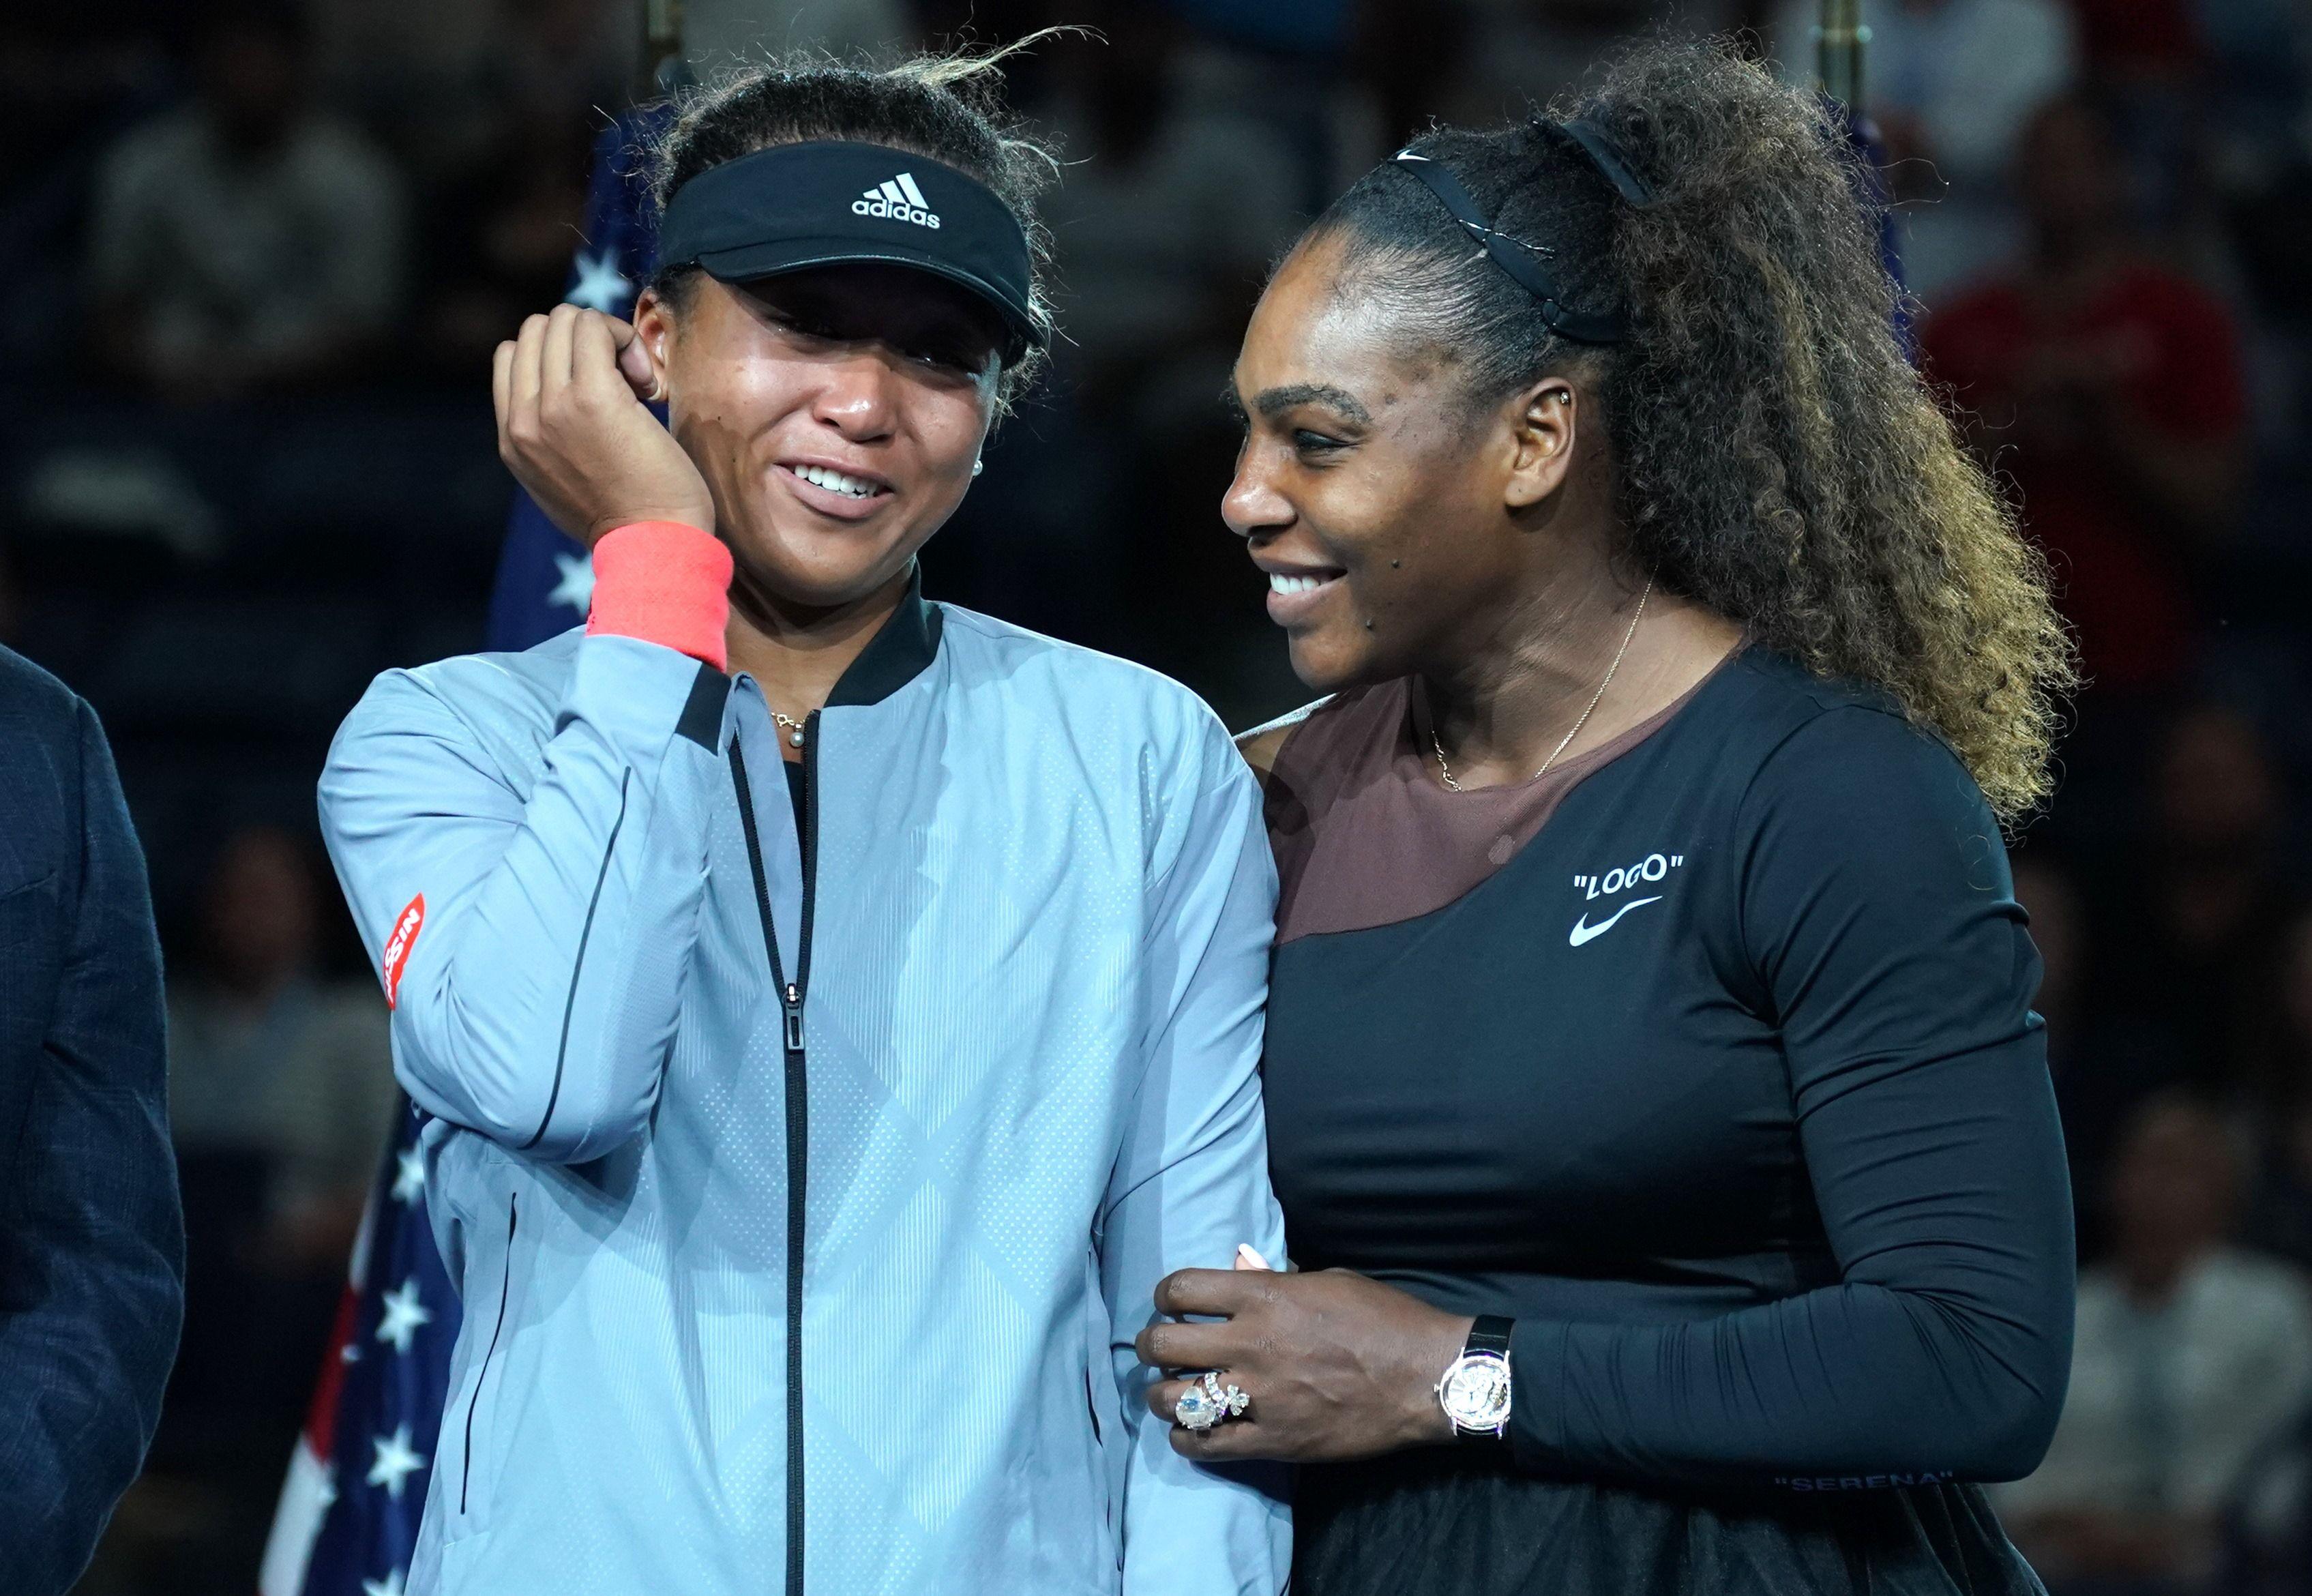 US Open Womens Single champion Naomi Osaka of Japan (L) with Serena Williams of the US during their Women's Singles Finals match at the 2018 US Open at the USTA Billie Jean King National Tennis Center in New York on September 8, 2018. (Photo by TIMOTHY A. CLARY / AFP)